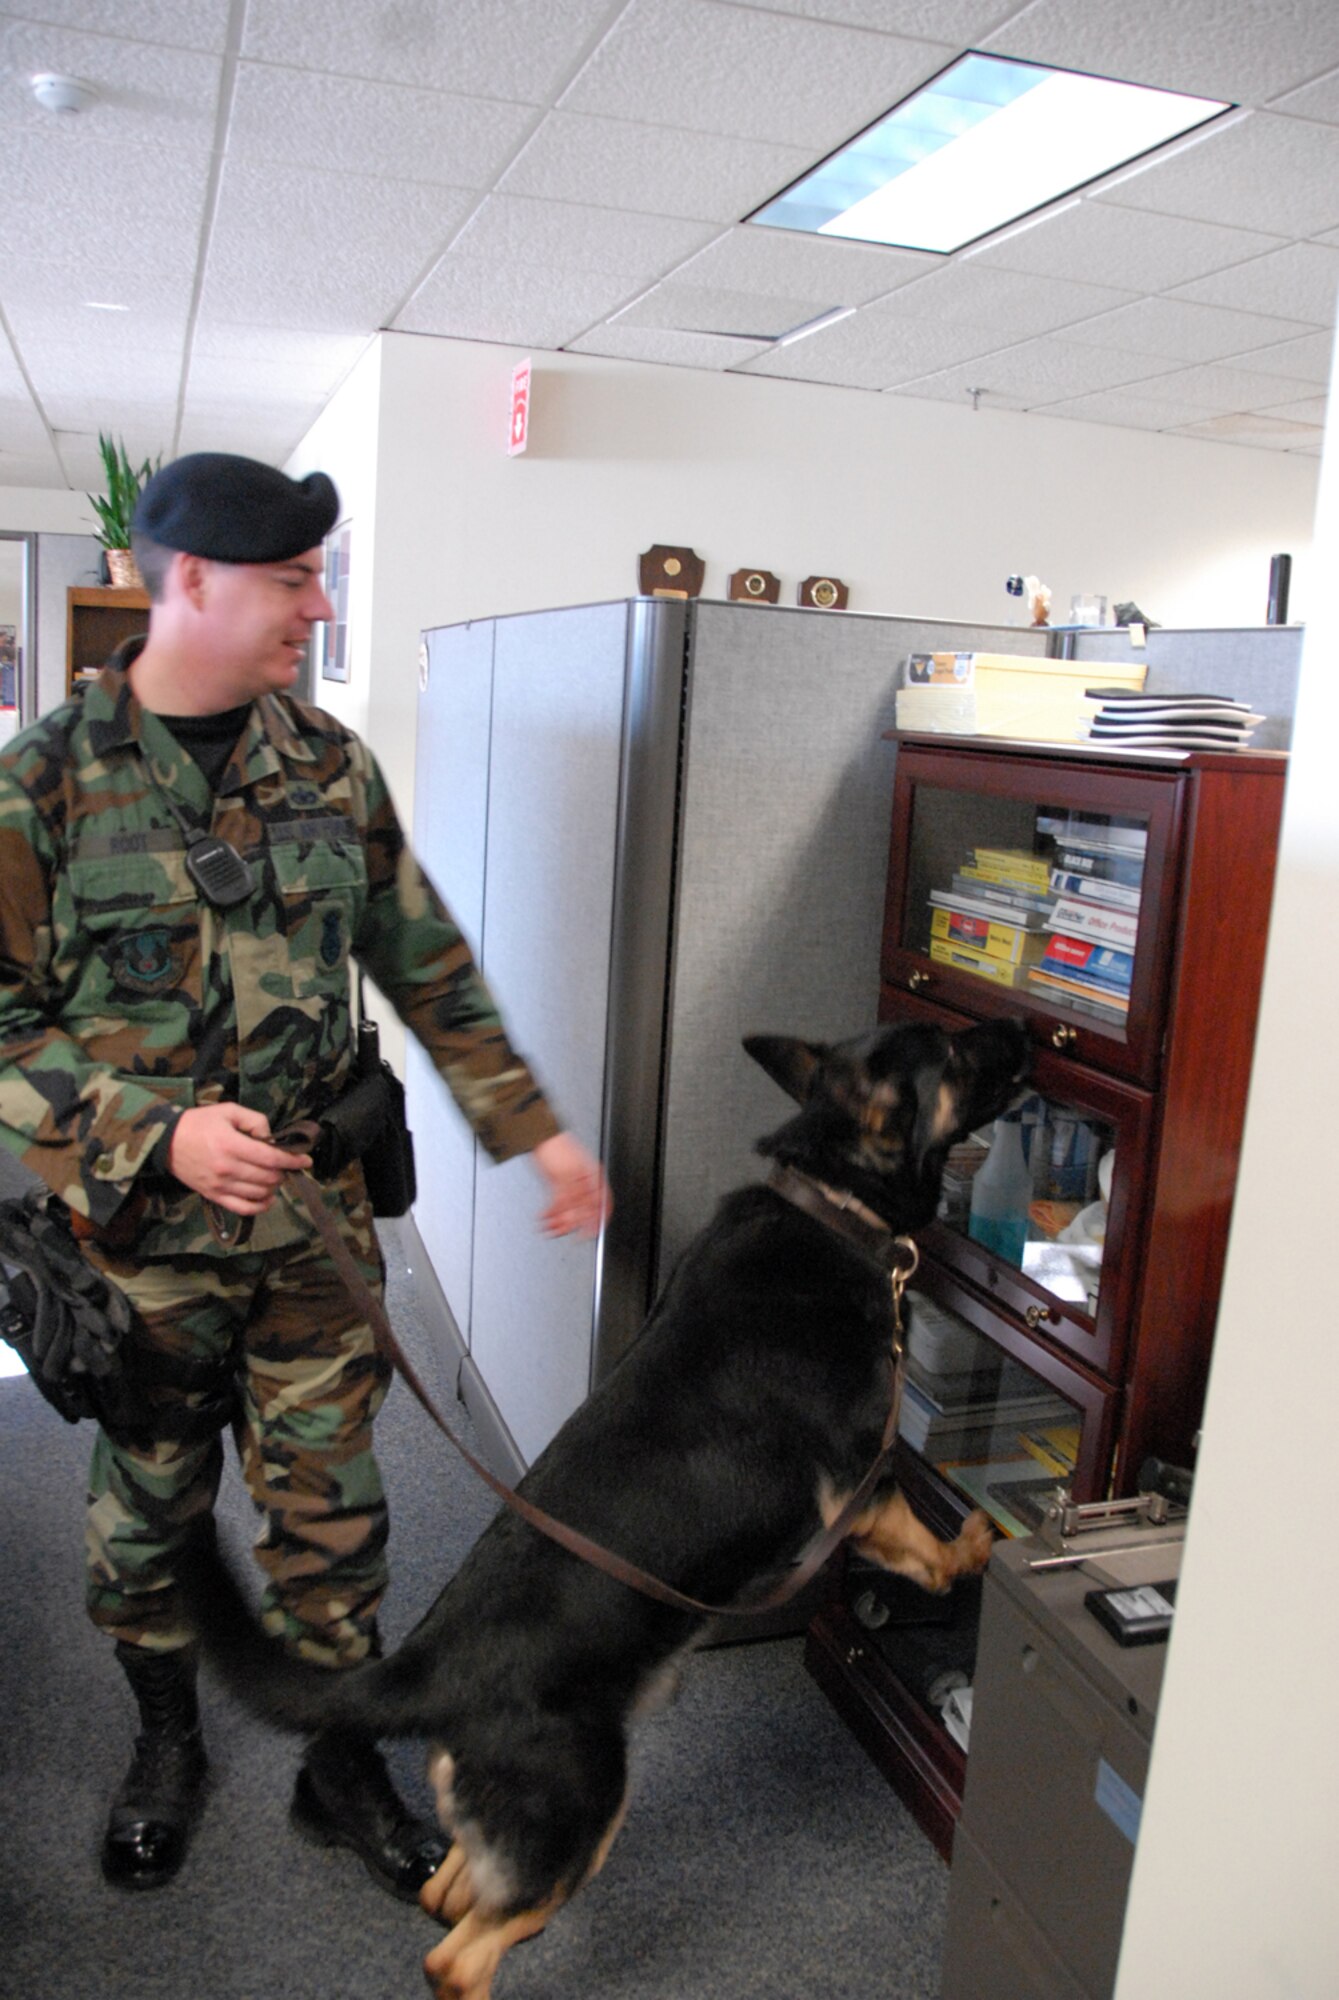 Staff Sgt. Terrance Root, 66th Security Force Squadron dog handler, and his Military Working Dog partner, Vero, perform a random search of building 1305. Sergeant Root and Vero perform random searches throughout the base as part of their patrol duties to deter crime. (US Air Force Photo by A1C Clinton Atkins)